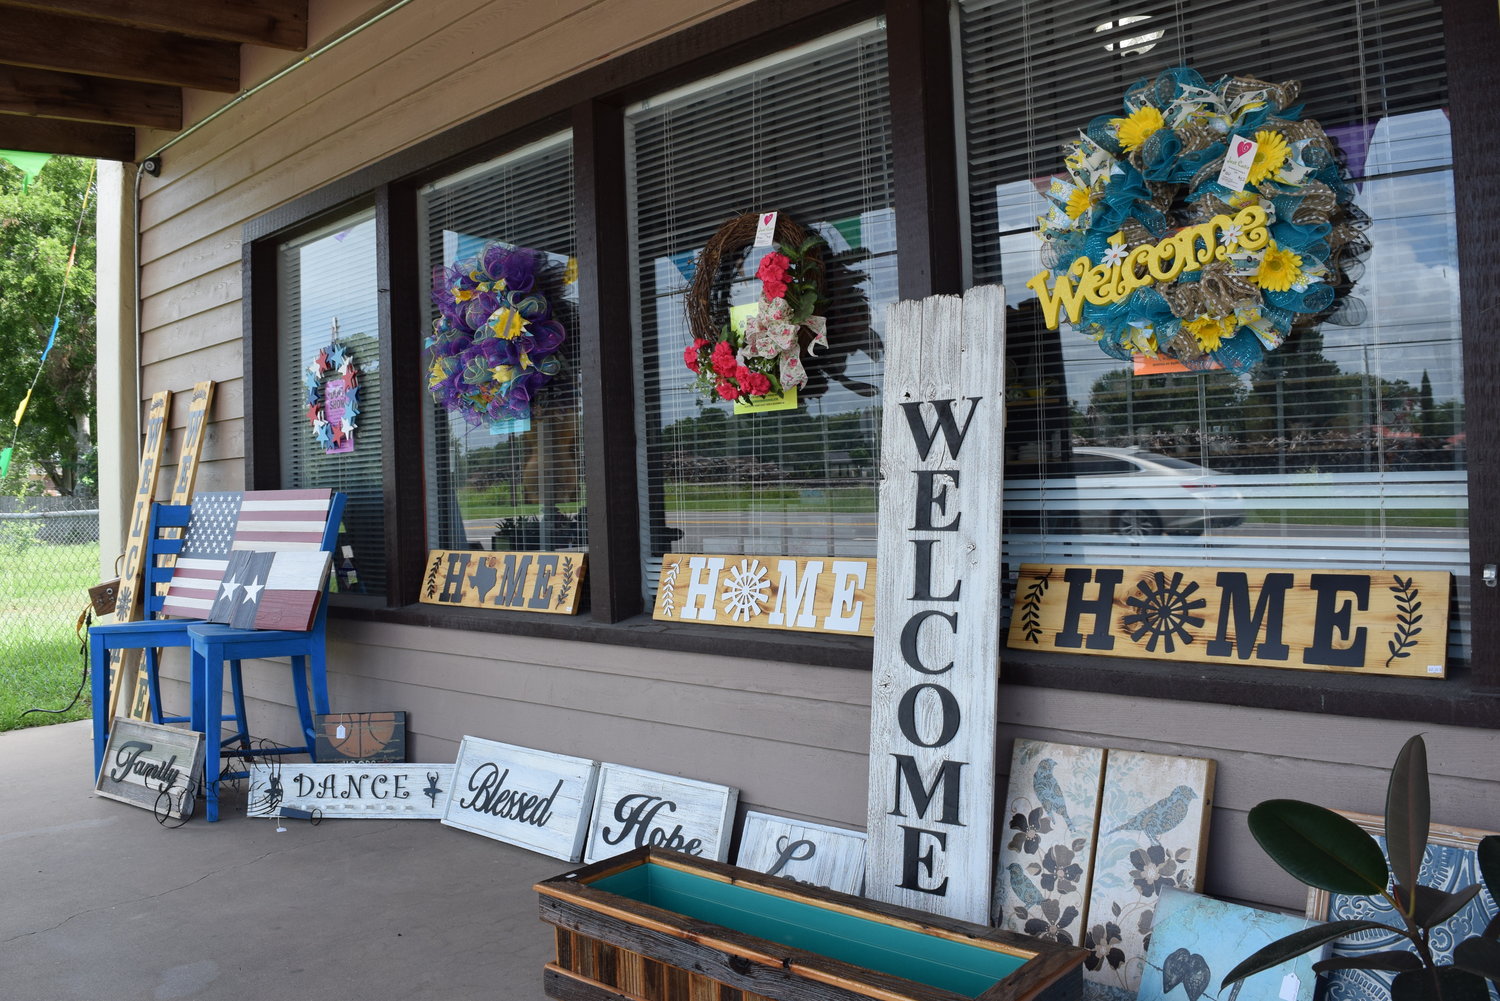 Bloomin’ 90 in downtown Brookshire along Highway 90 offers a variety of outdoor and indoor décor for shoppers to enjoy. The craft shop’s inventory includes planters, patriotic paraphernalia and wreaths to make a home more welcoming and cozier.